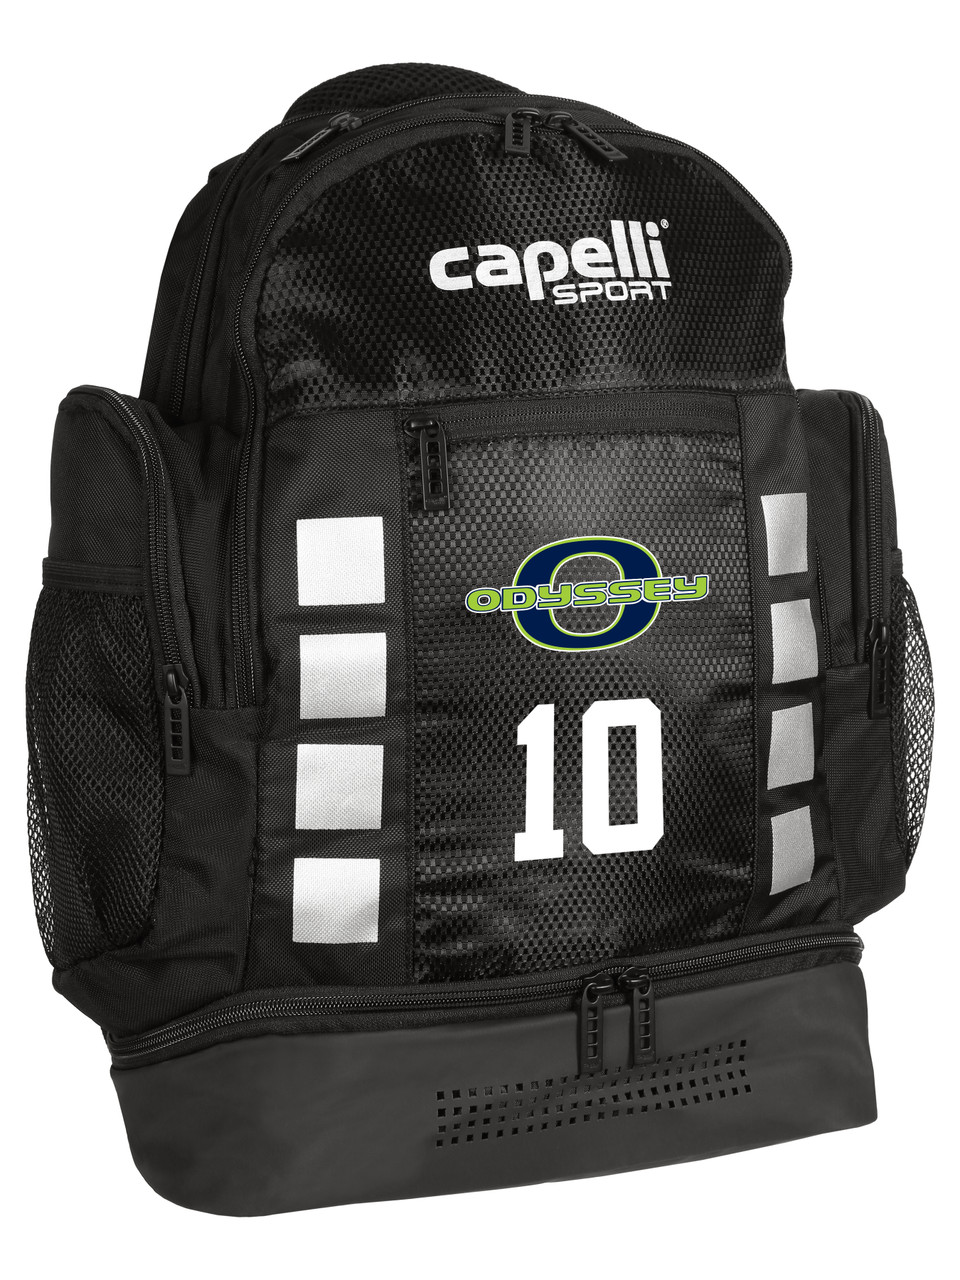 ODYSSEY 4 CUBE BACKPACK -- BLACK SILVER - Capelli Sport